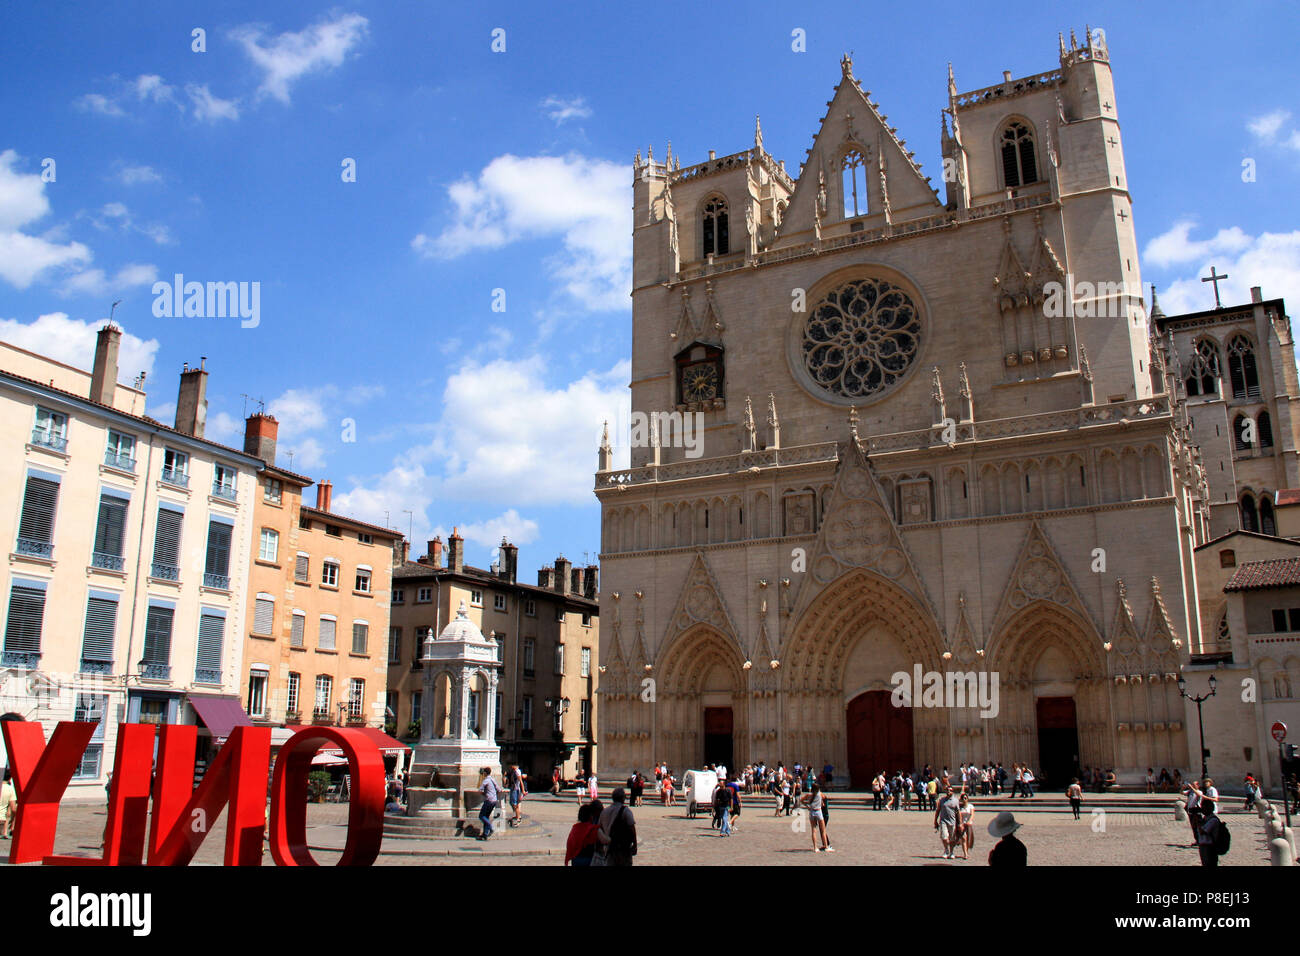 Cathédrale Saint-Jean-Baptiste de Lyon or Lyon Cathedral (giant lettering 'ONLY LYON' in the foreground), City of Lyon, France Stock Photo